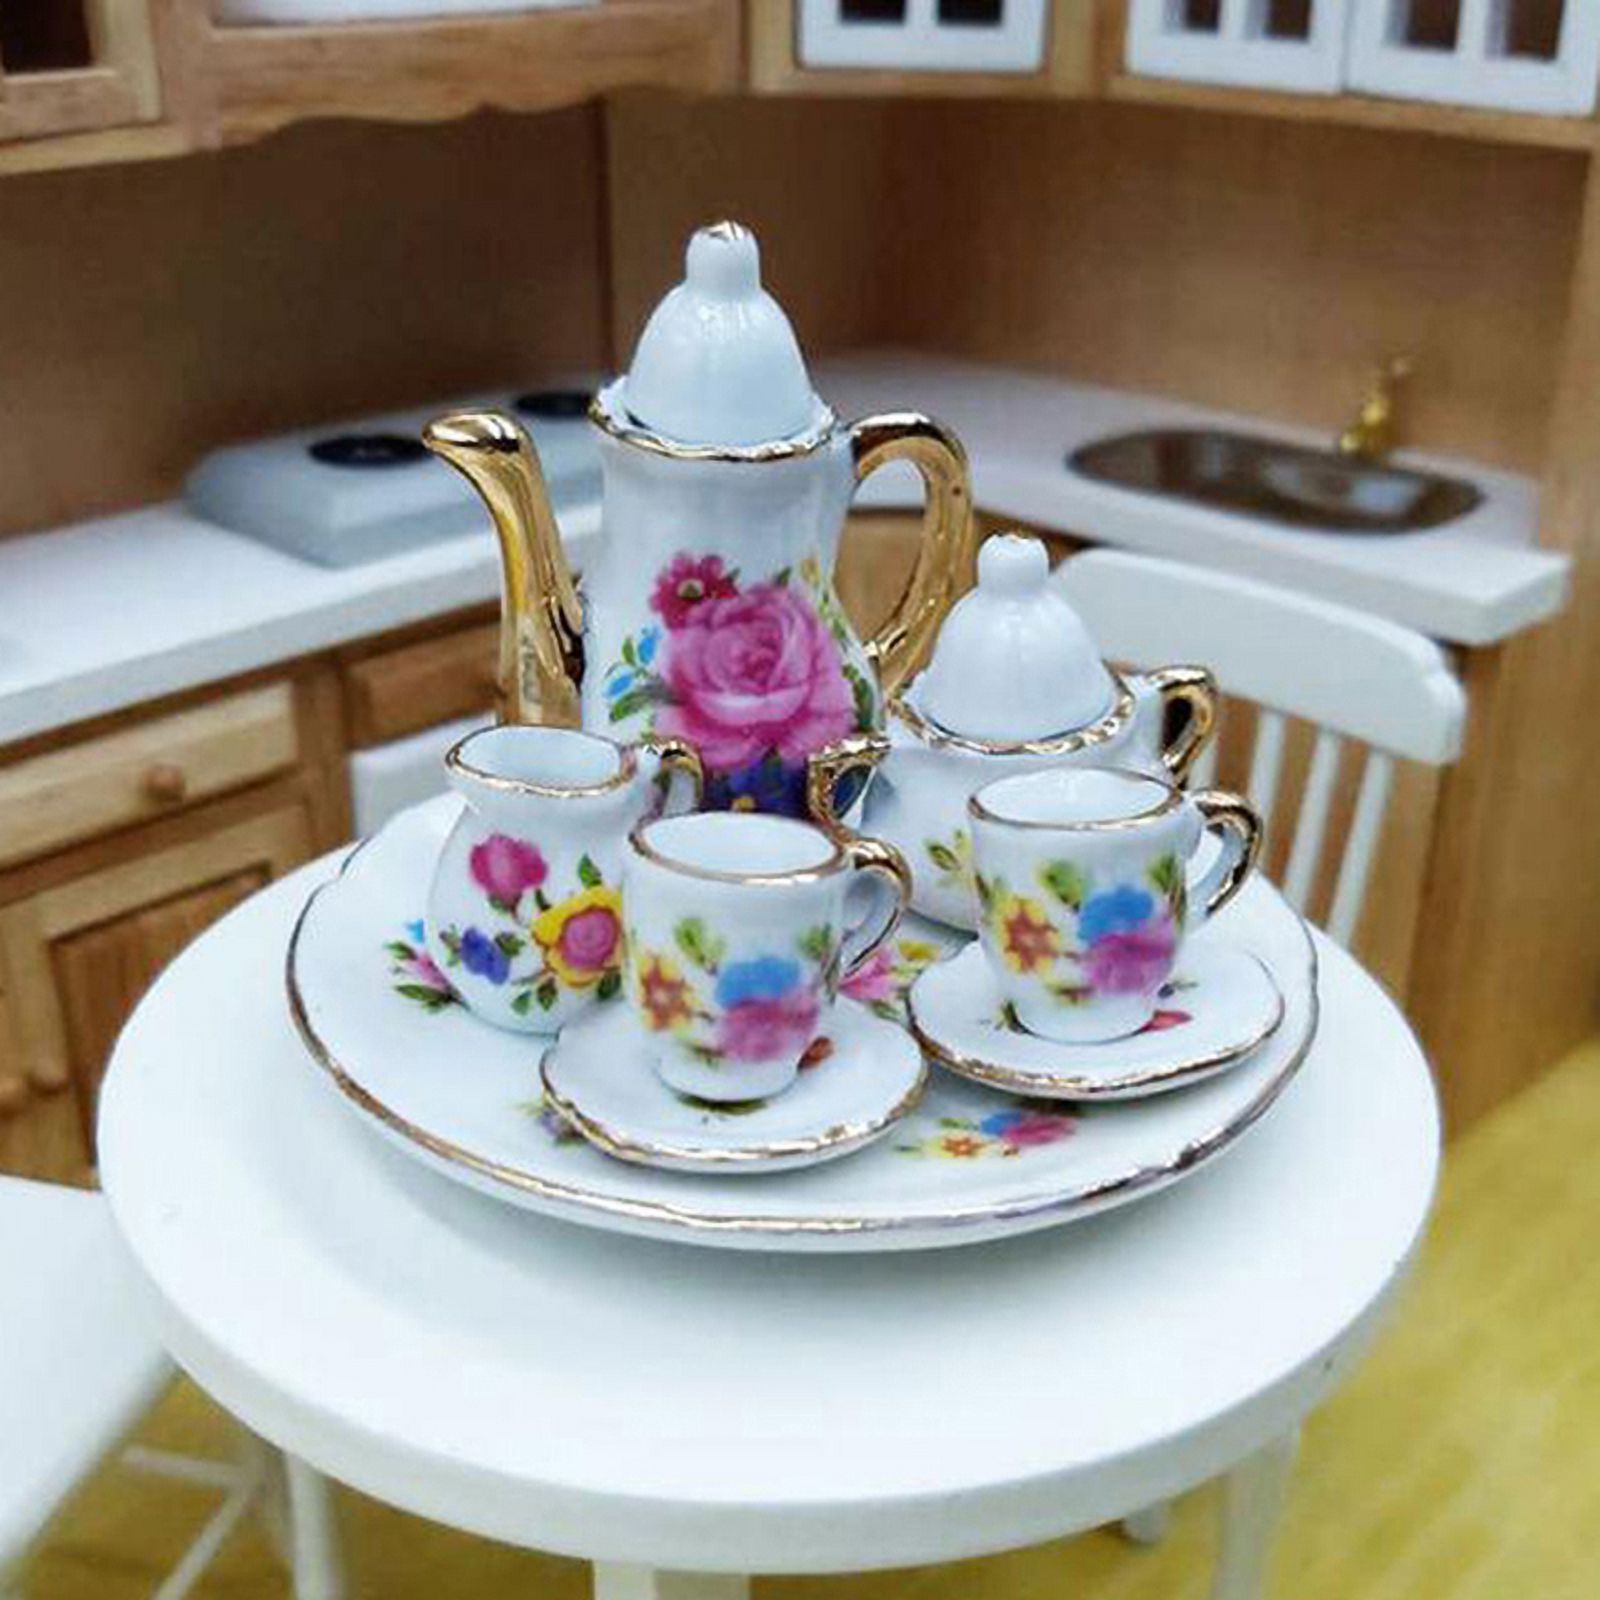 JETTINGBUY Dollhouse Miniature Dining Ware Porcelain; Tea Set Dish Cup Plate - image 4 of 4